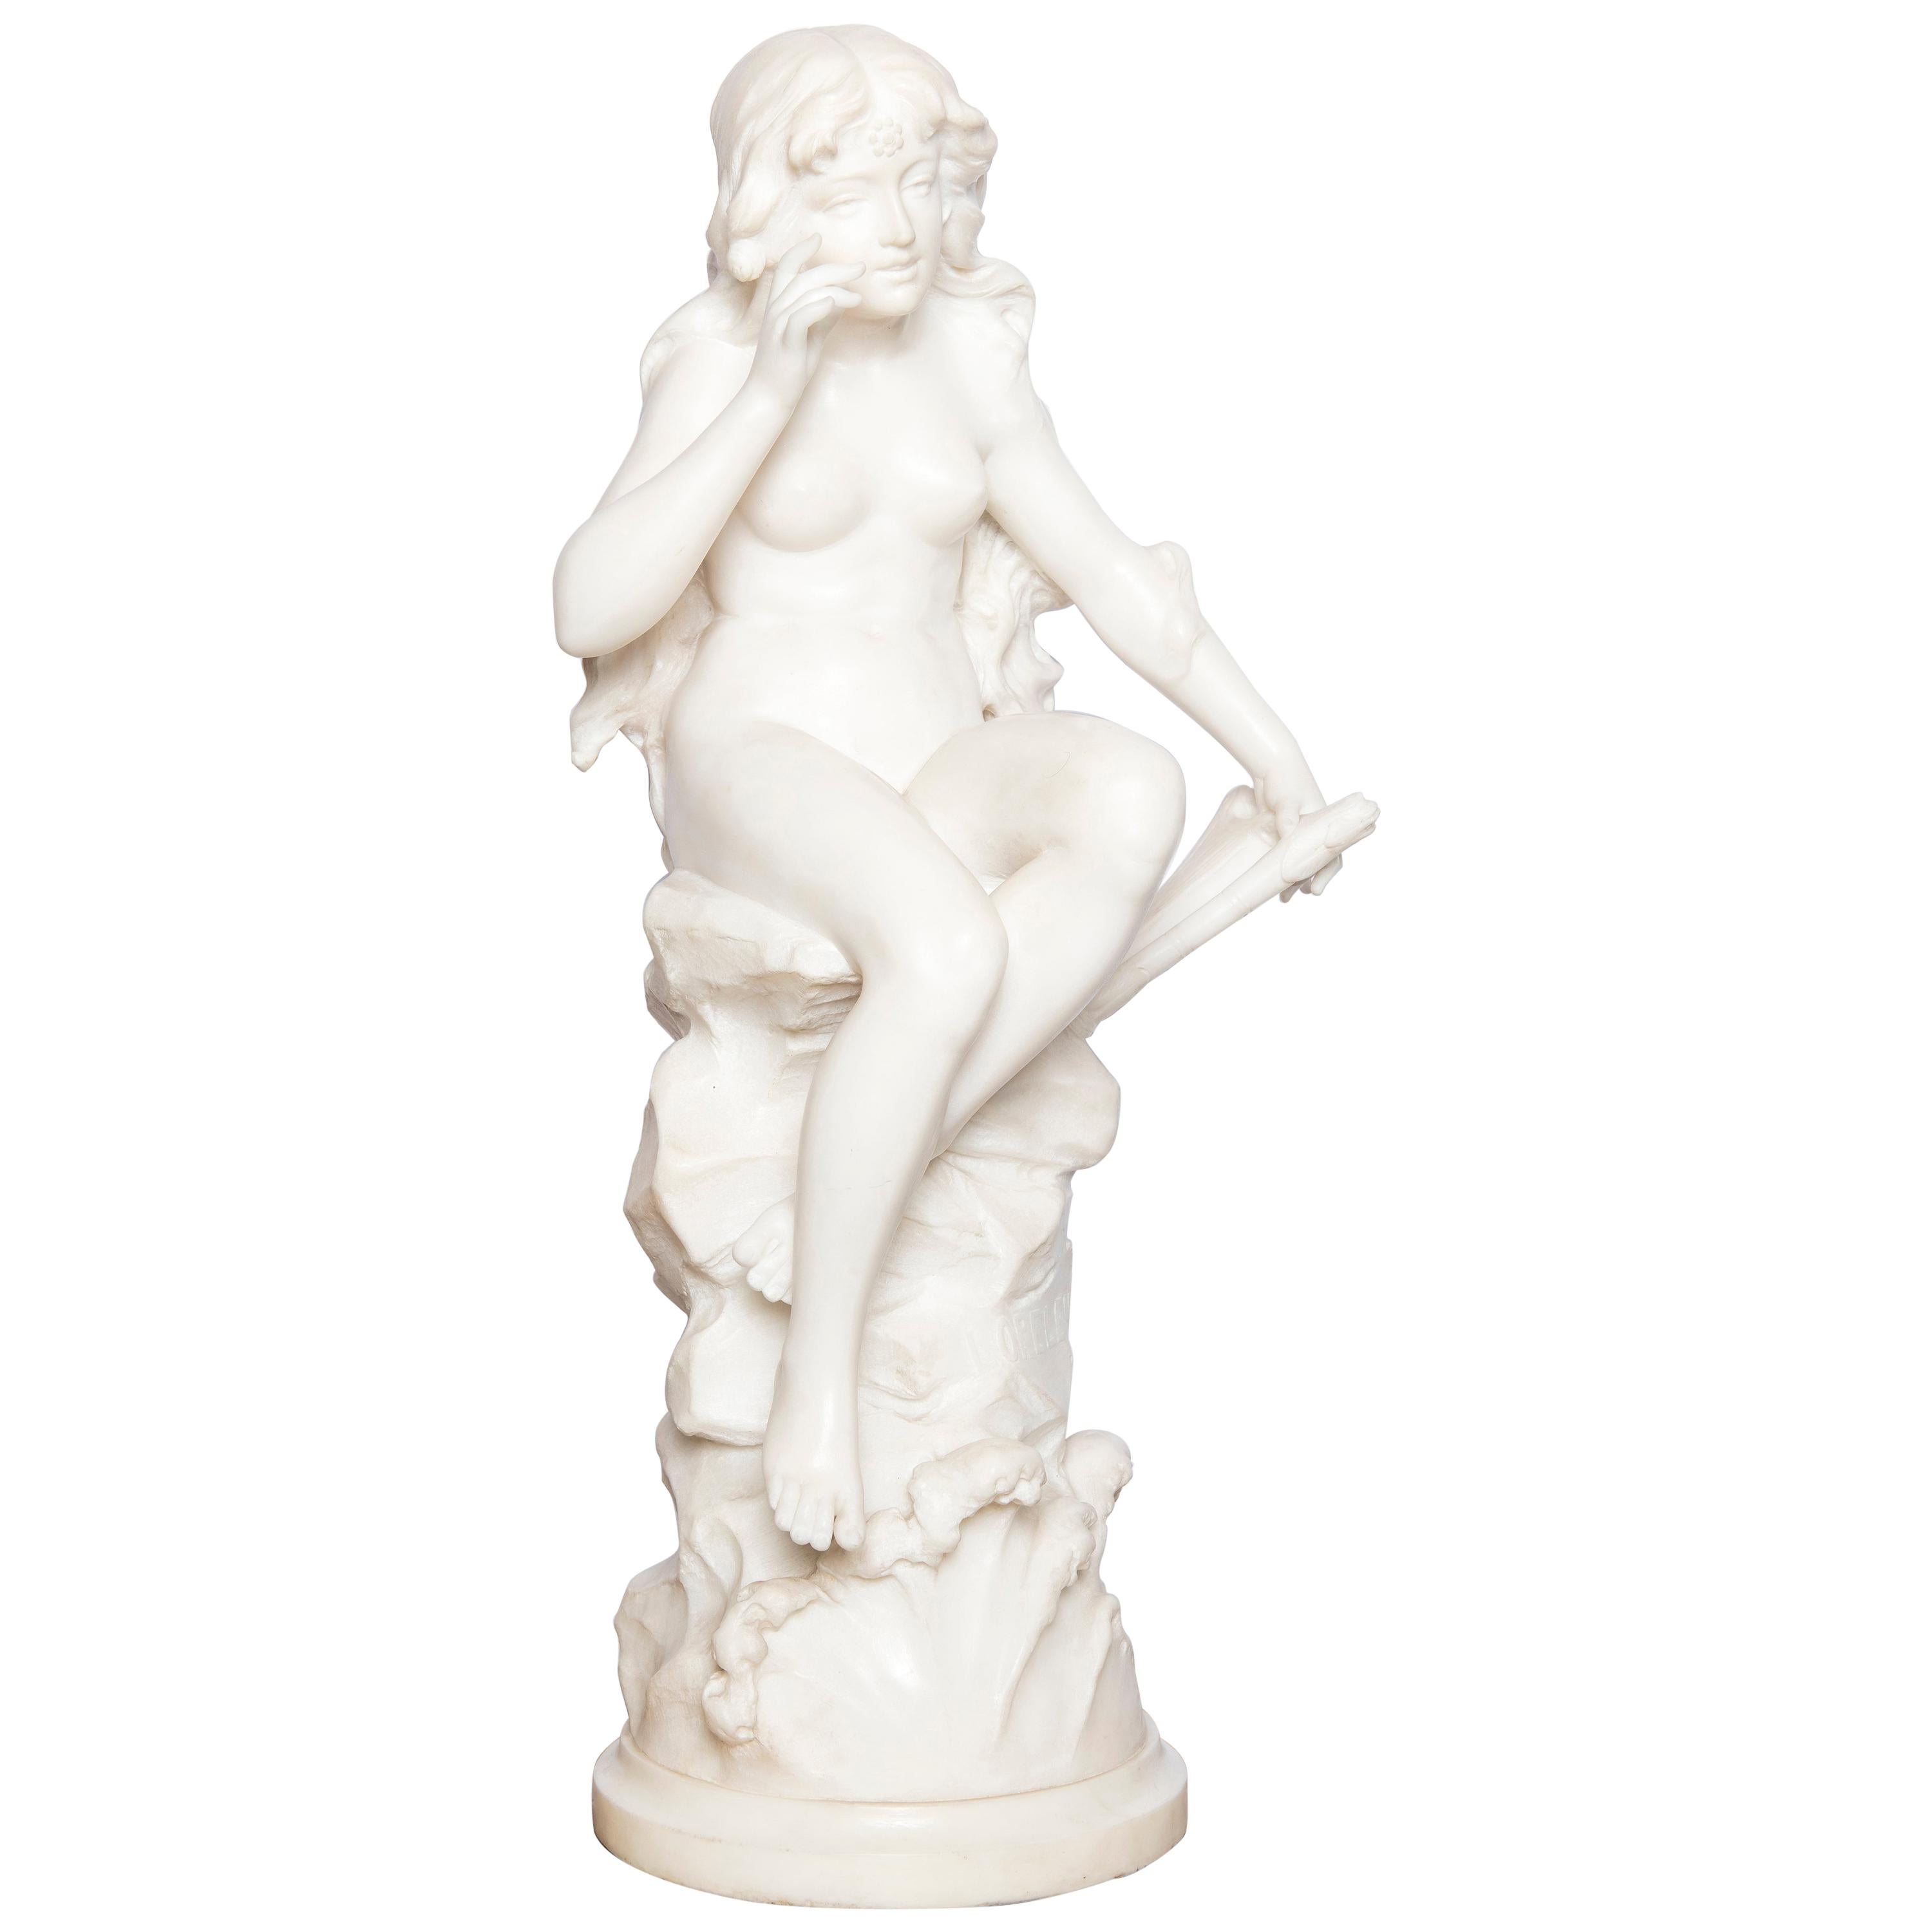 Carrara Marble Sculpture Signed "Loreley" by Hippolyte Moreau, France, 1890 For Sale